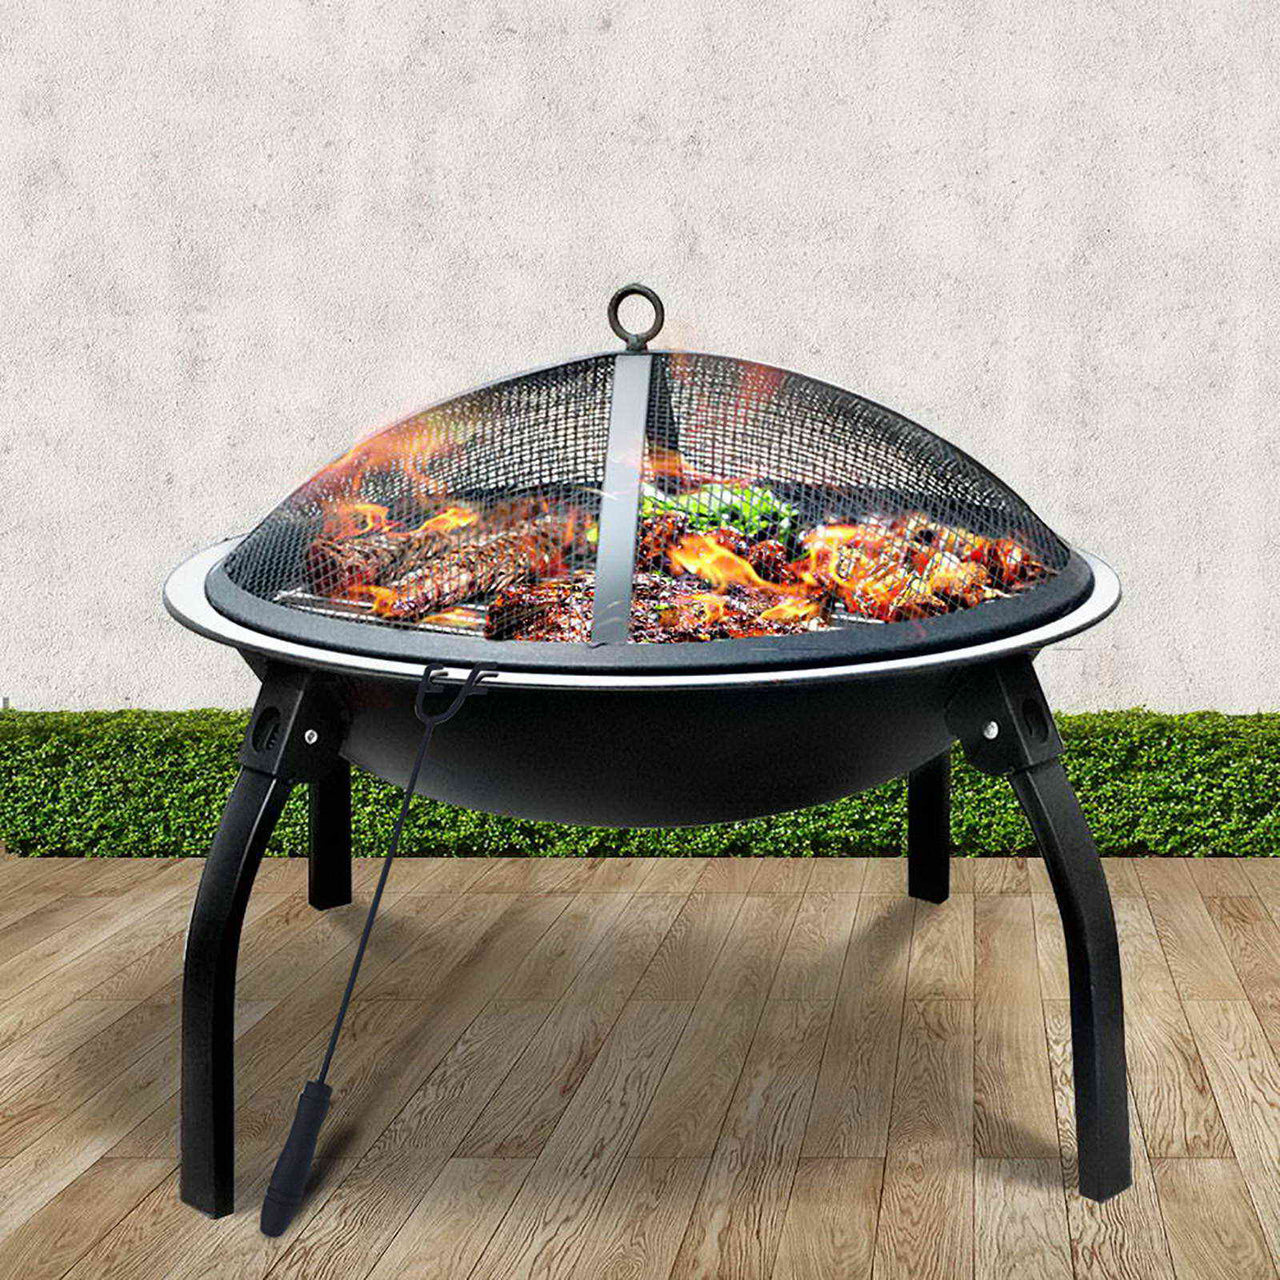 Portable 30" Fire Pit, BBQ, Charcoal, Grill Smoker - Outdoor Immersion